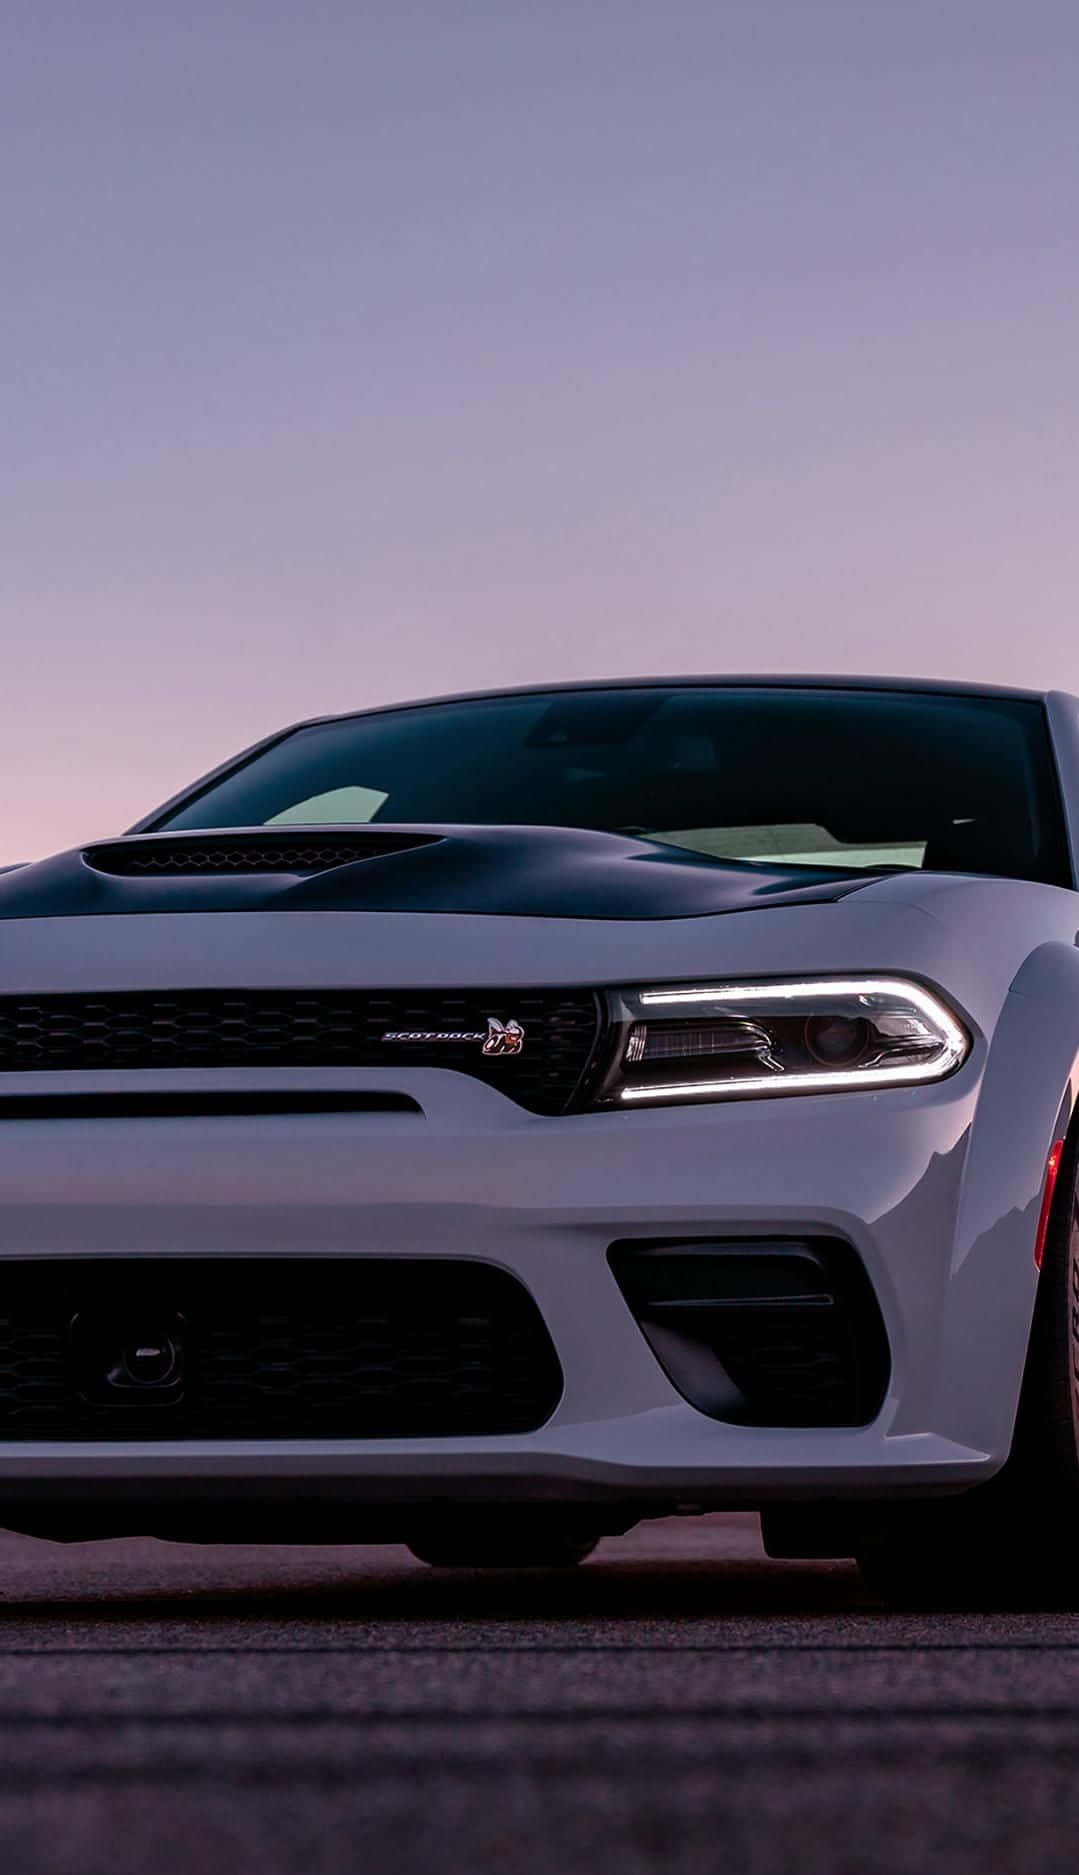 Upgrade Your Technology with this Dodge Charger Iphone Wallpaper Wallpaper